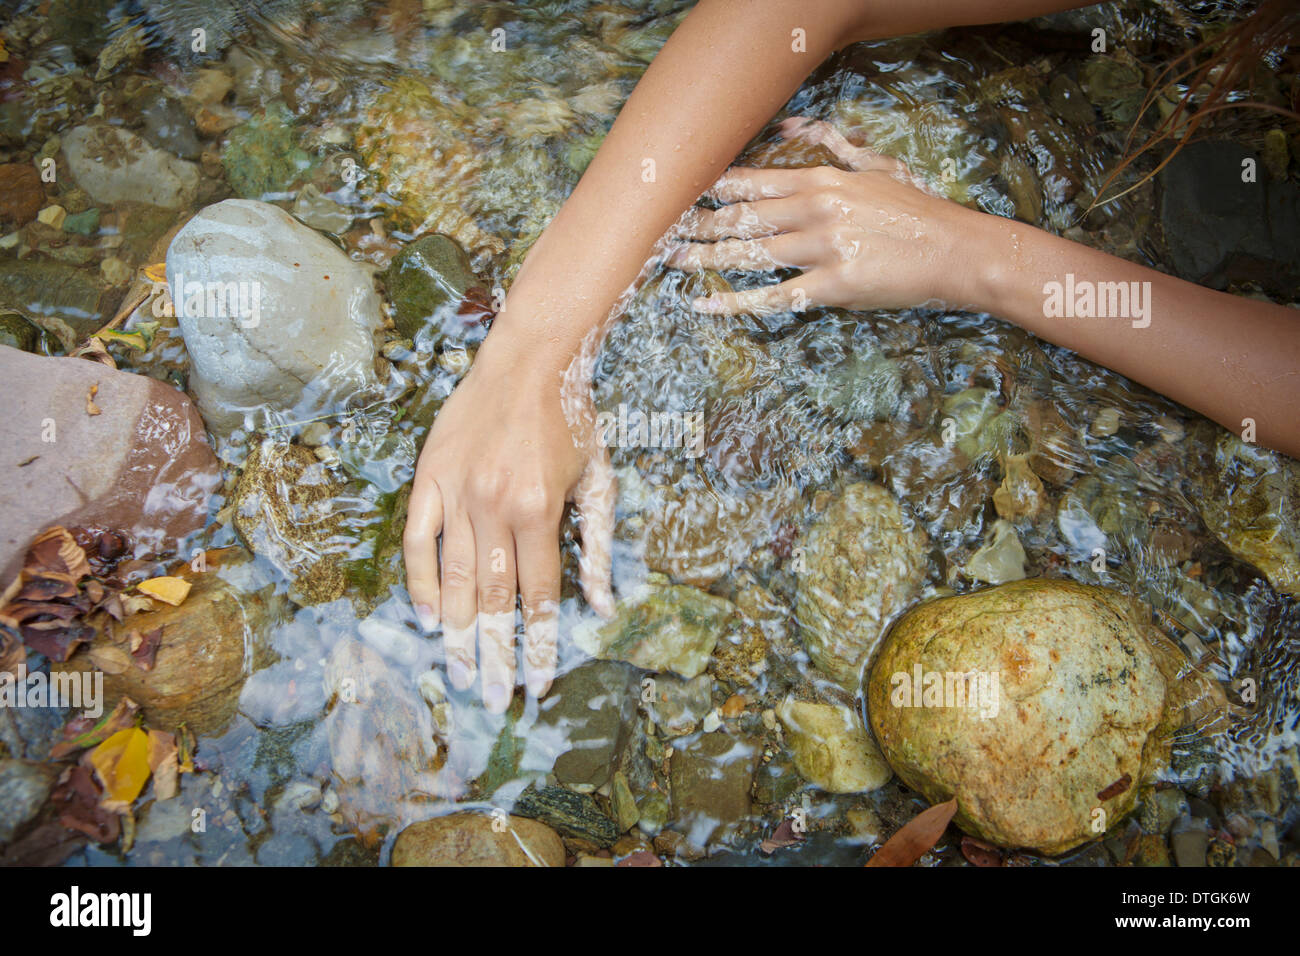 Woman's hands in a stream Banque D'Images